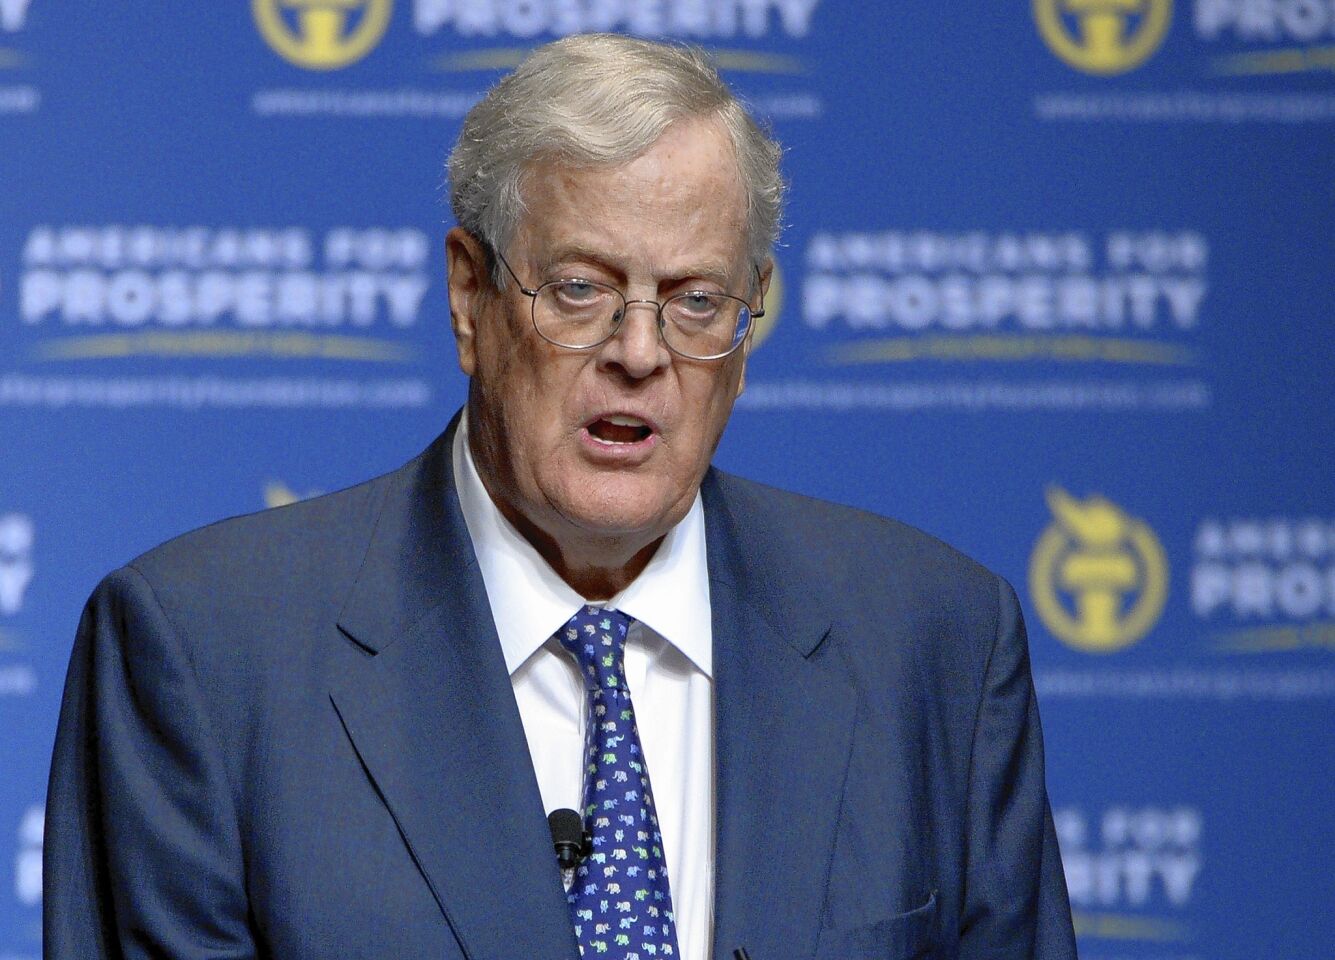 David Koch was the aide de camp to Charles, his older brother, as the two leveraged the family fortune to push American politics to the right. The Koch brothers pushed the boundaries of dark money in politics and fueled a backlash against environmental regulations and government programs such as healthcare and mass transit. He was 79.